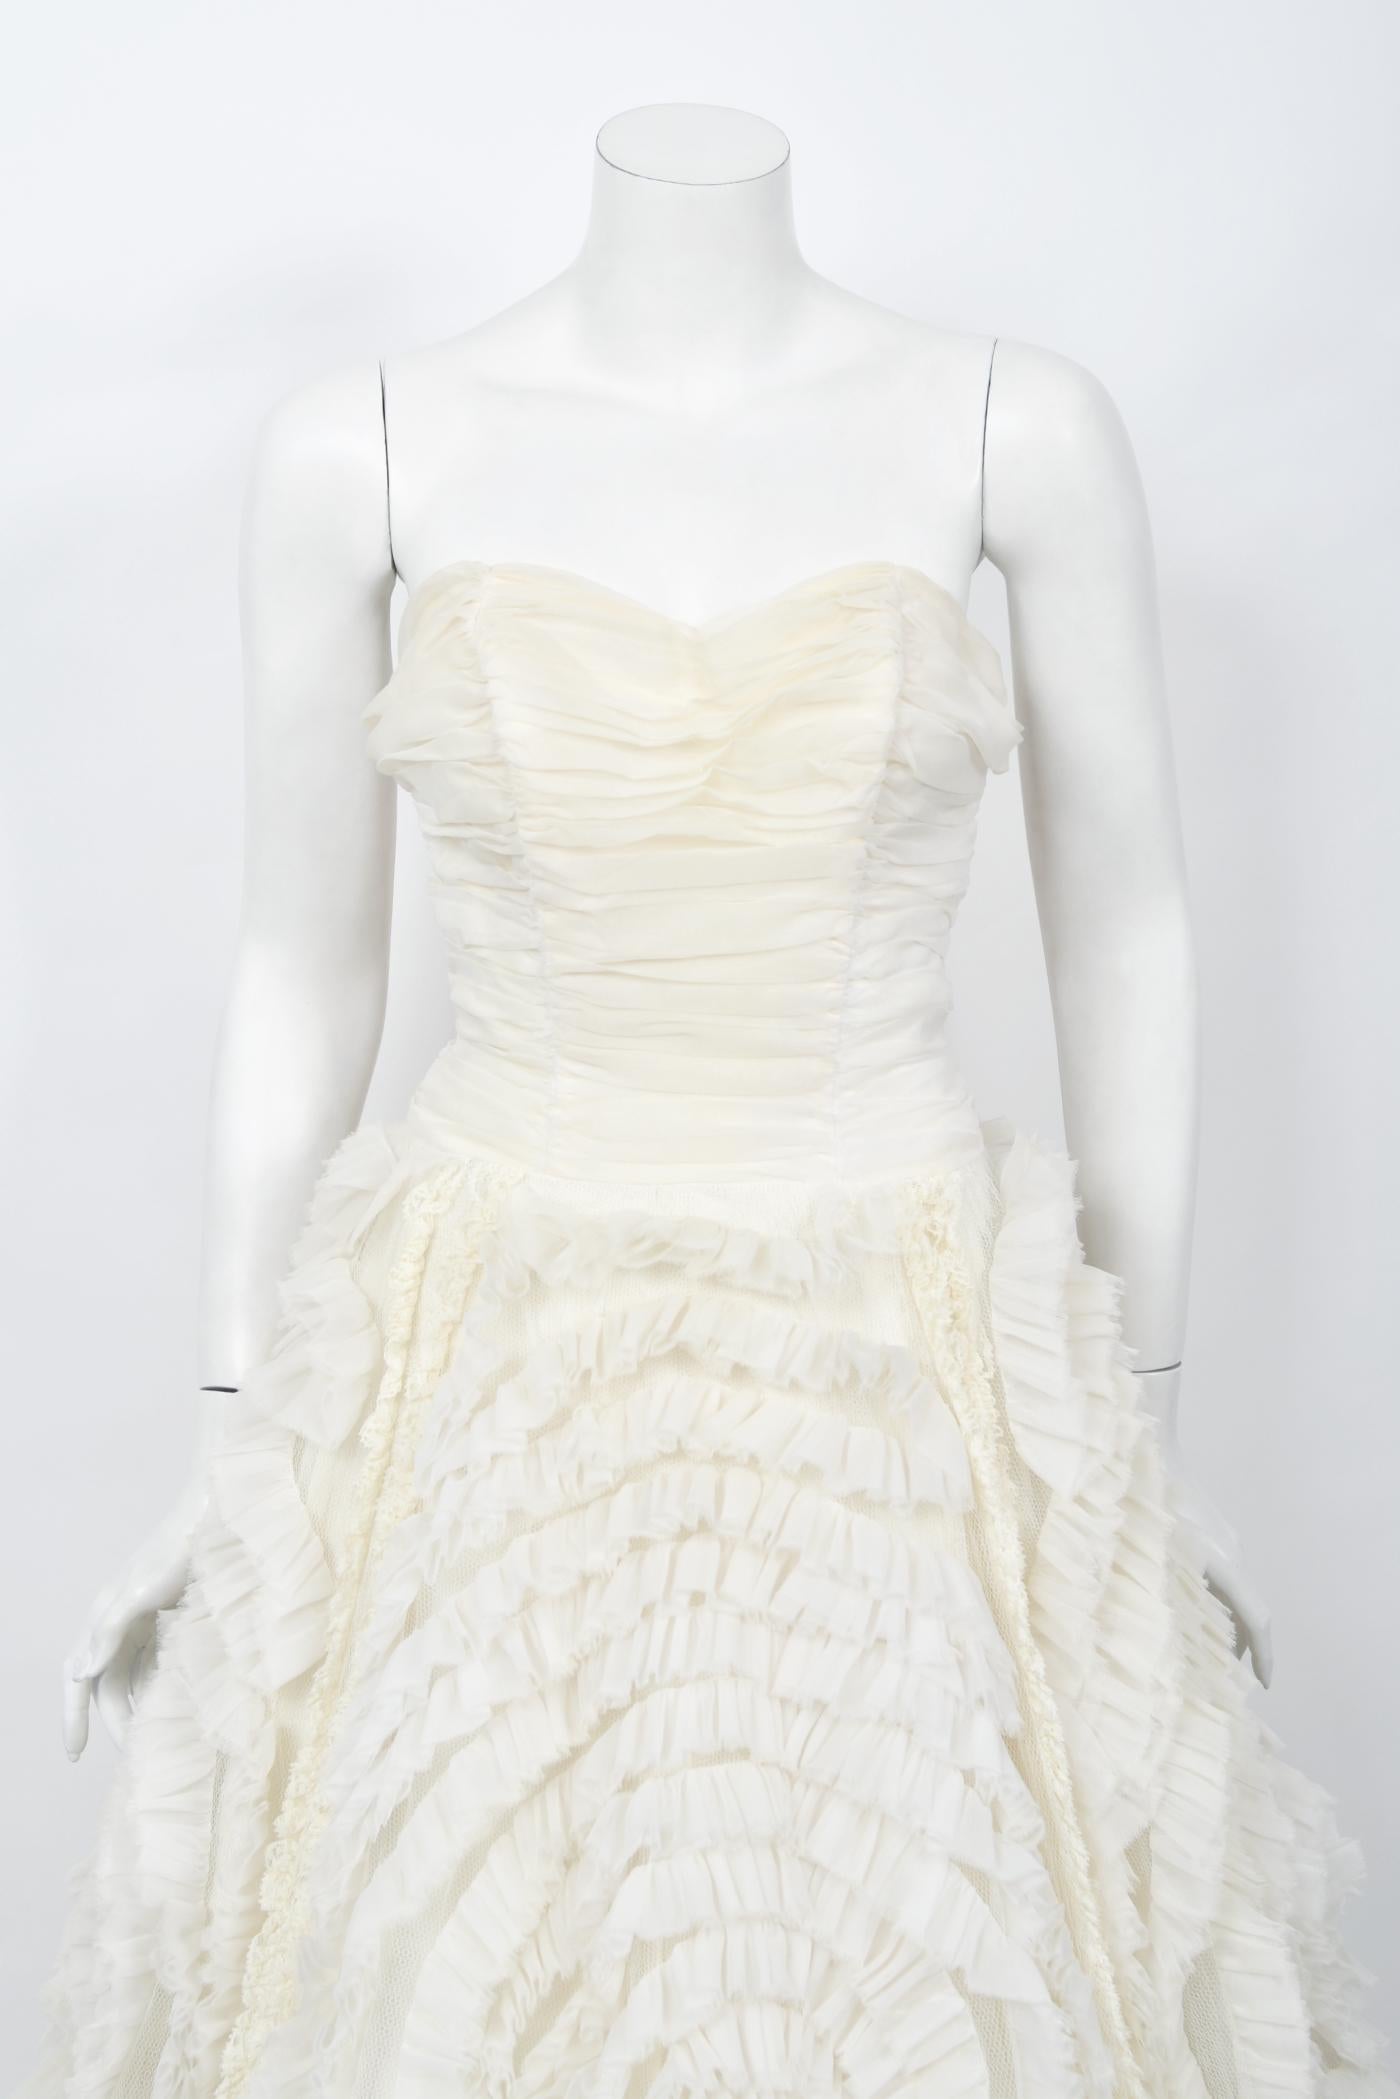 Women's Vintage 1950's Ivory Chiffon Strapless Tiered Ruffle Full-Length Bridal Gown 